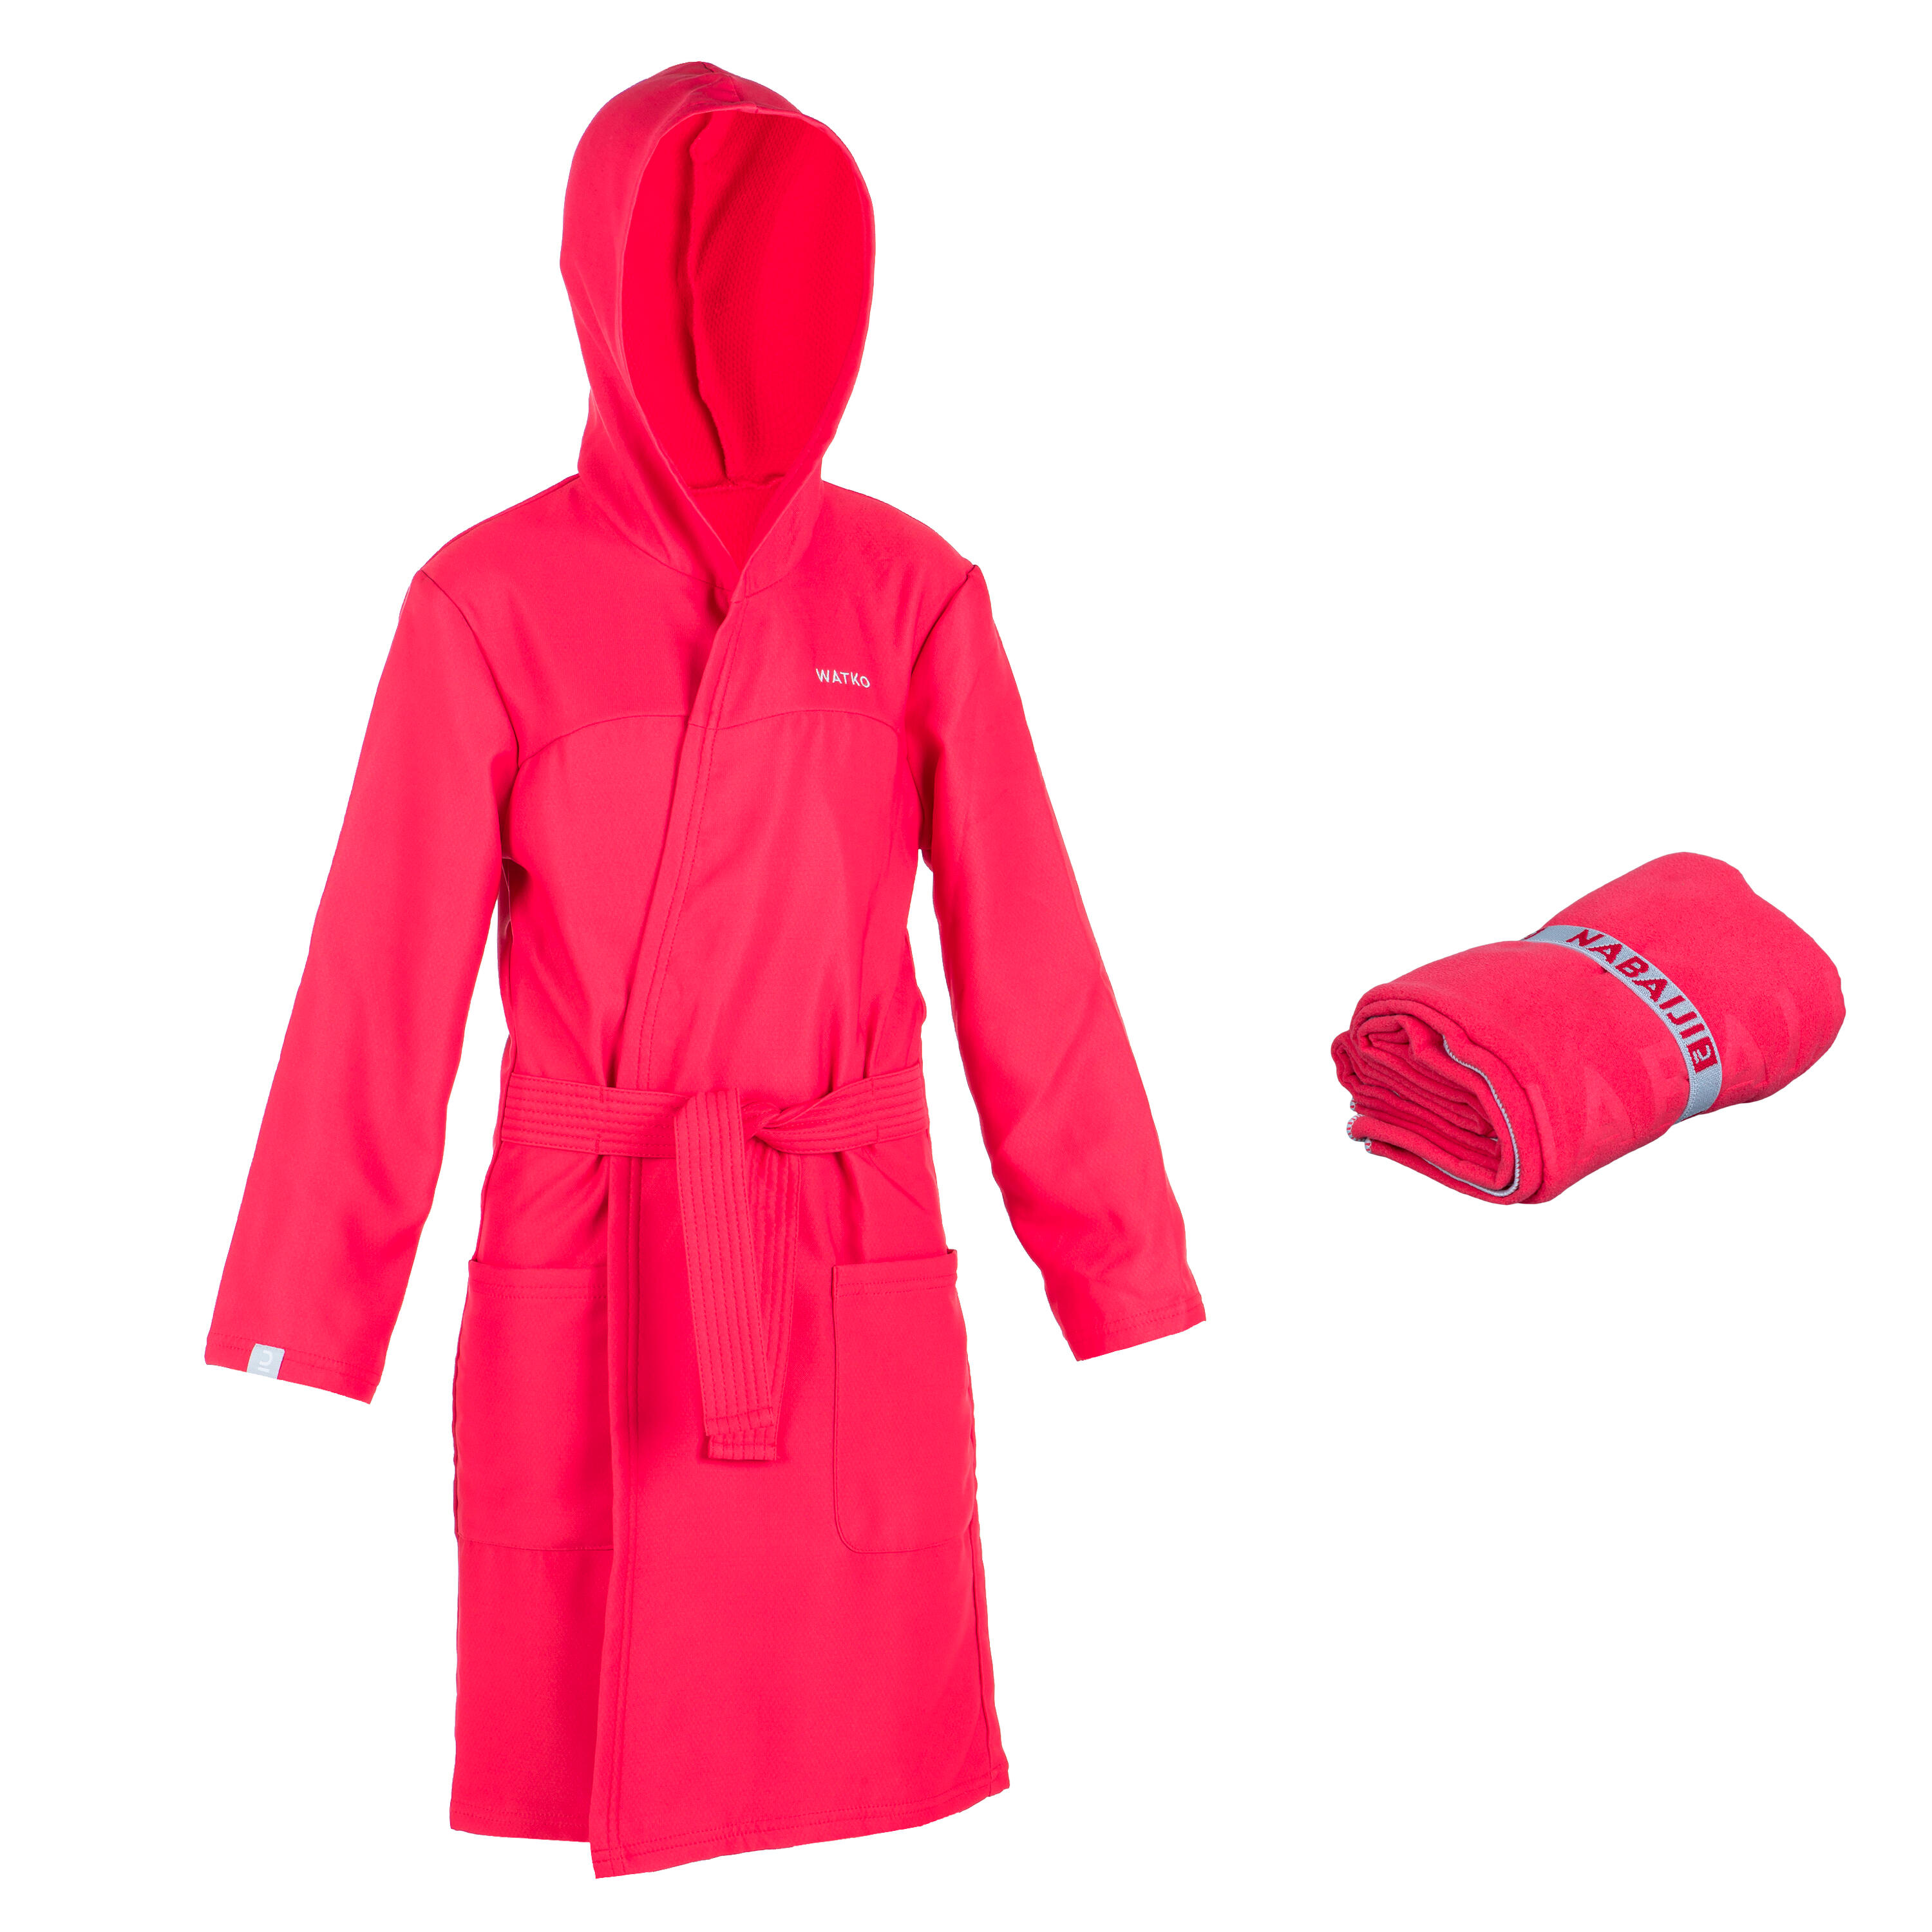 KID'S COMPACT BATHROBE AND TOWEL - RED 1/7